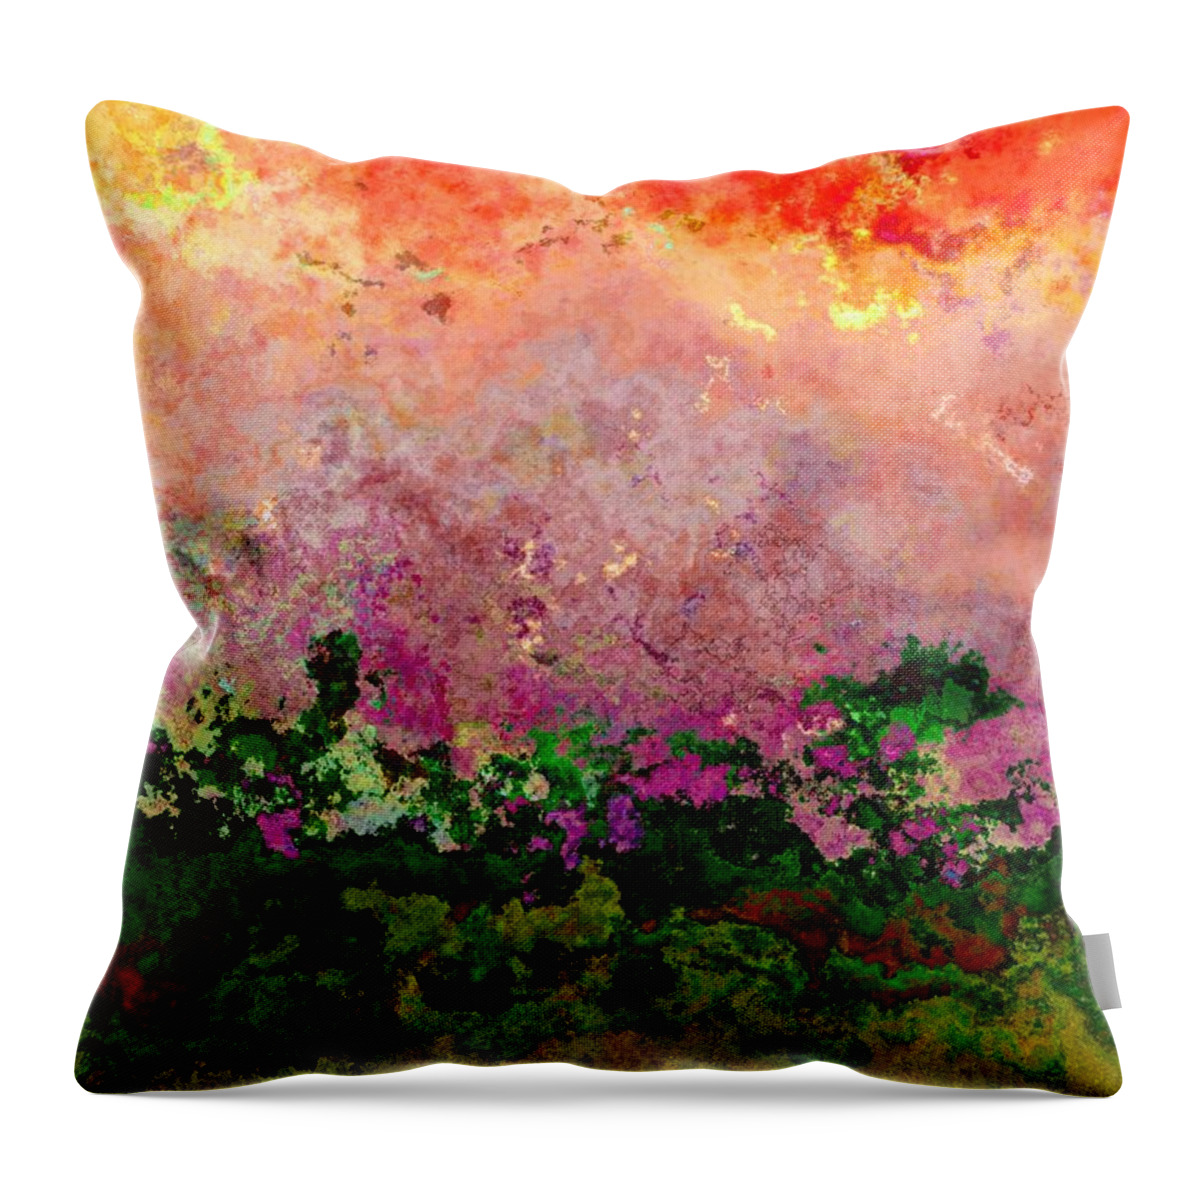 Abstract Throw Pillow featuring the digital art Meadow Morning by Wendy J St Christopher